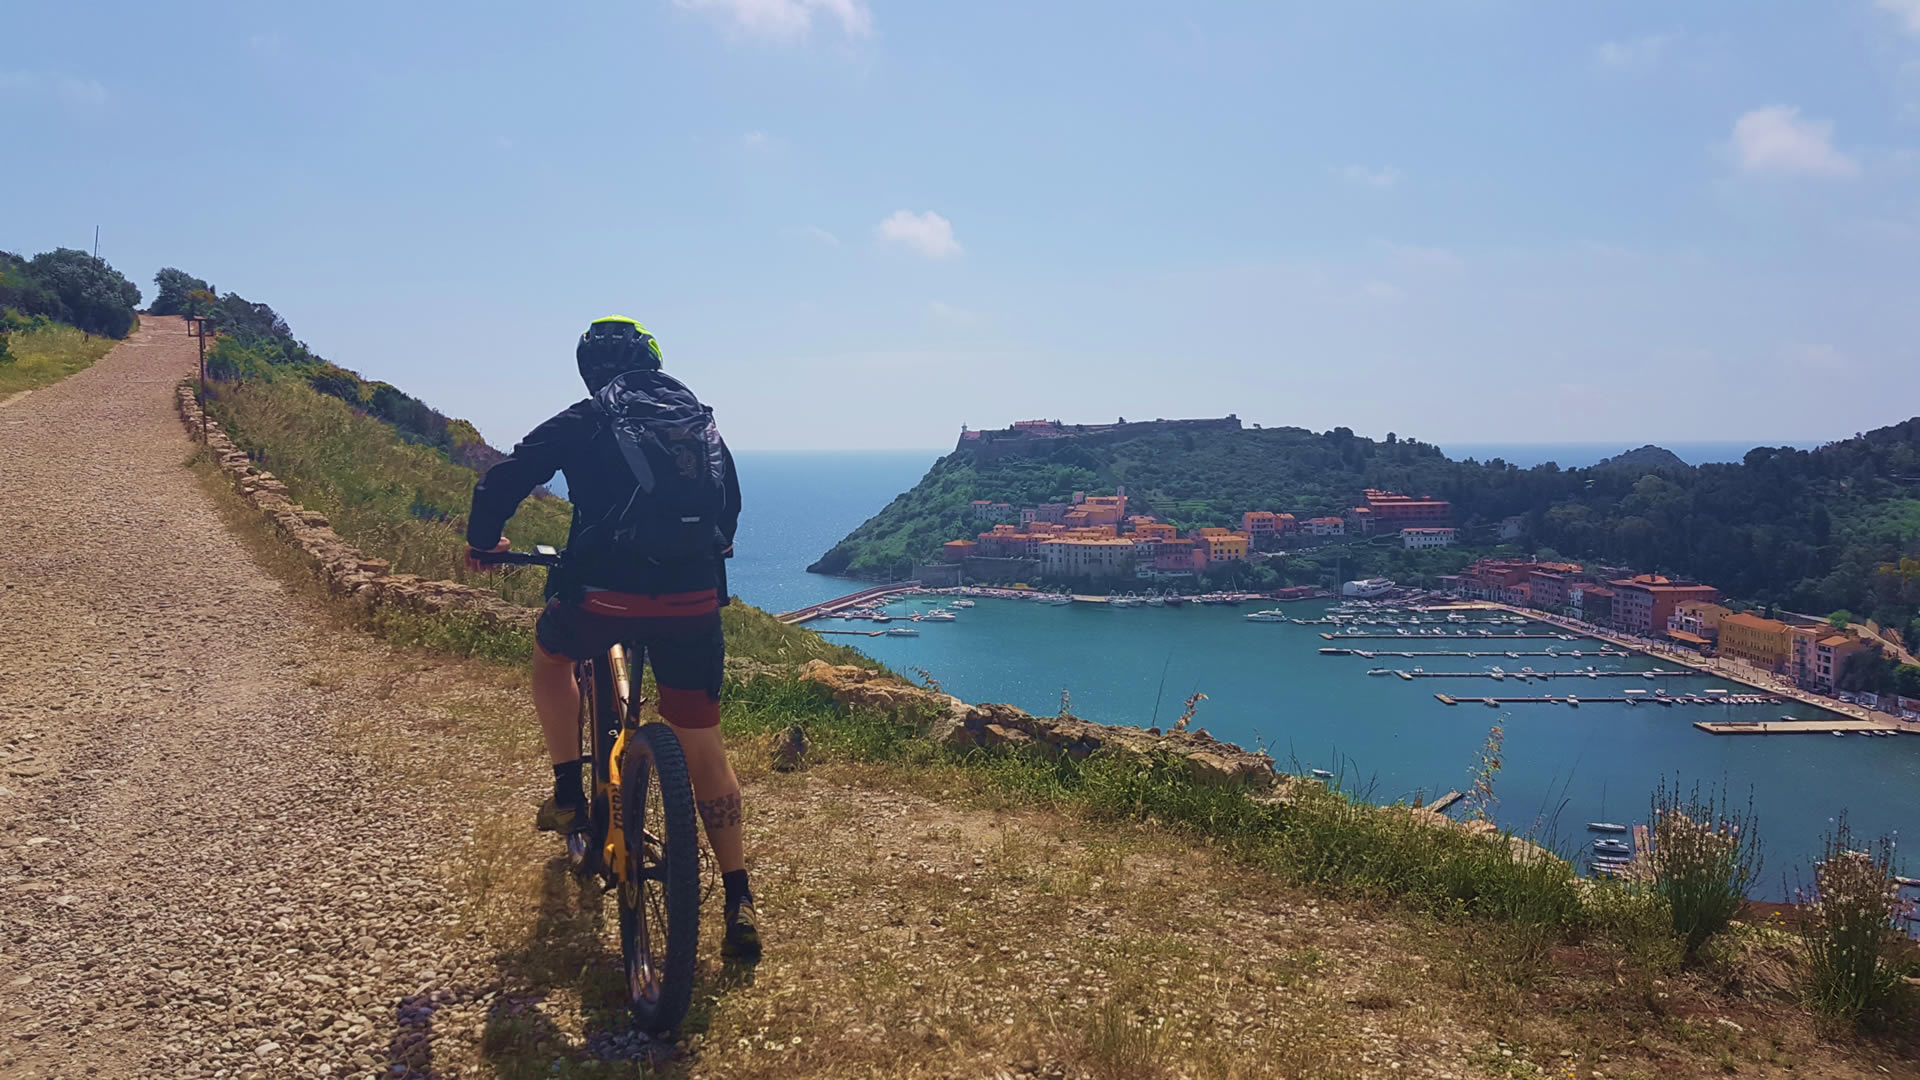 Argentario by bike - view of the argentario peninsula from above riding a bicycle